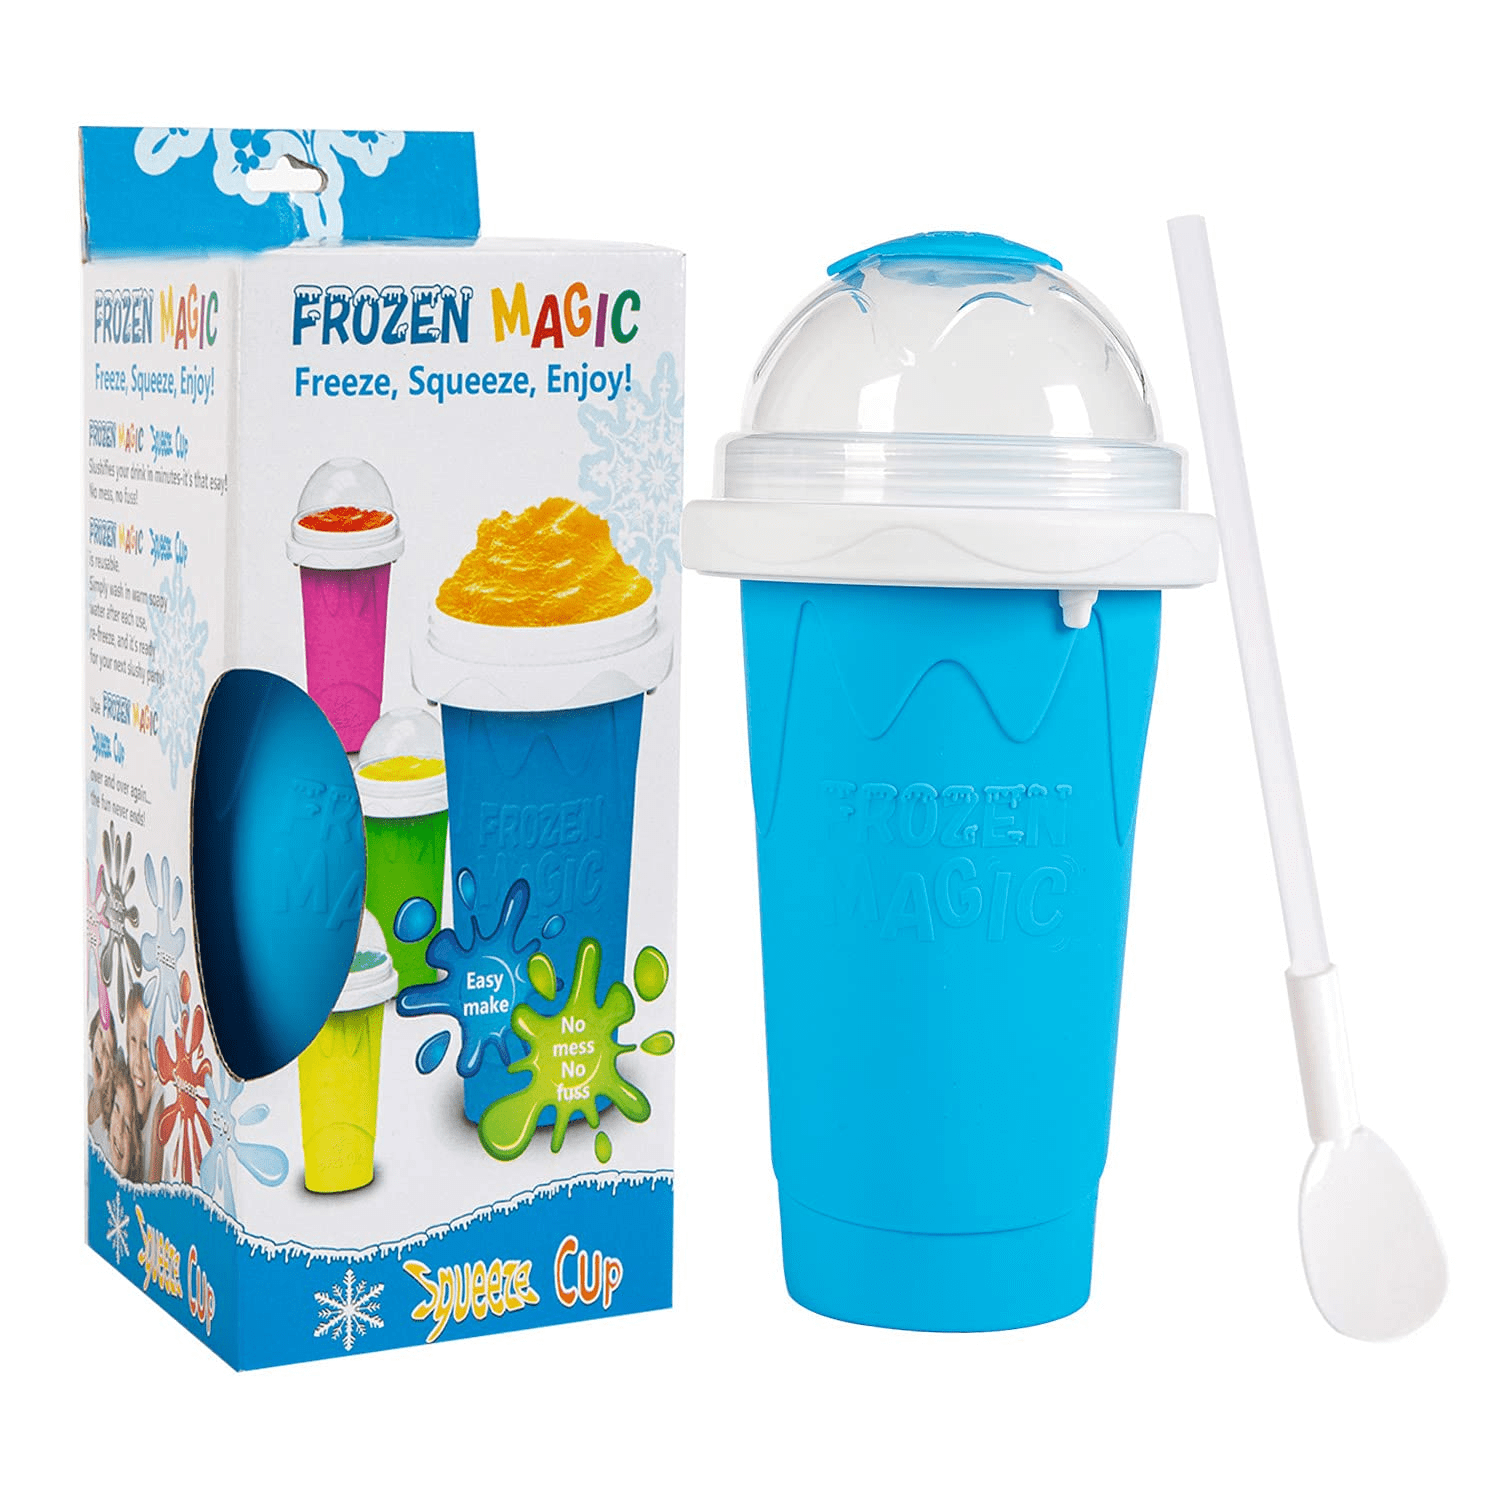 Slushie Maker Cup Green Homemade Ice Cream Maker DIY it for Children and Family Magic Quick Frozen Smoothies Cup Cooling Cup Double Layer Squeeze Cup Slushy Maker 